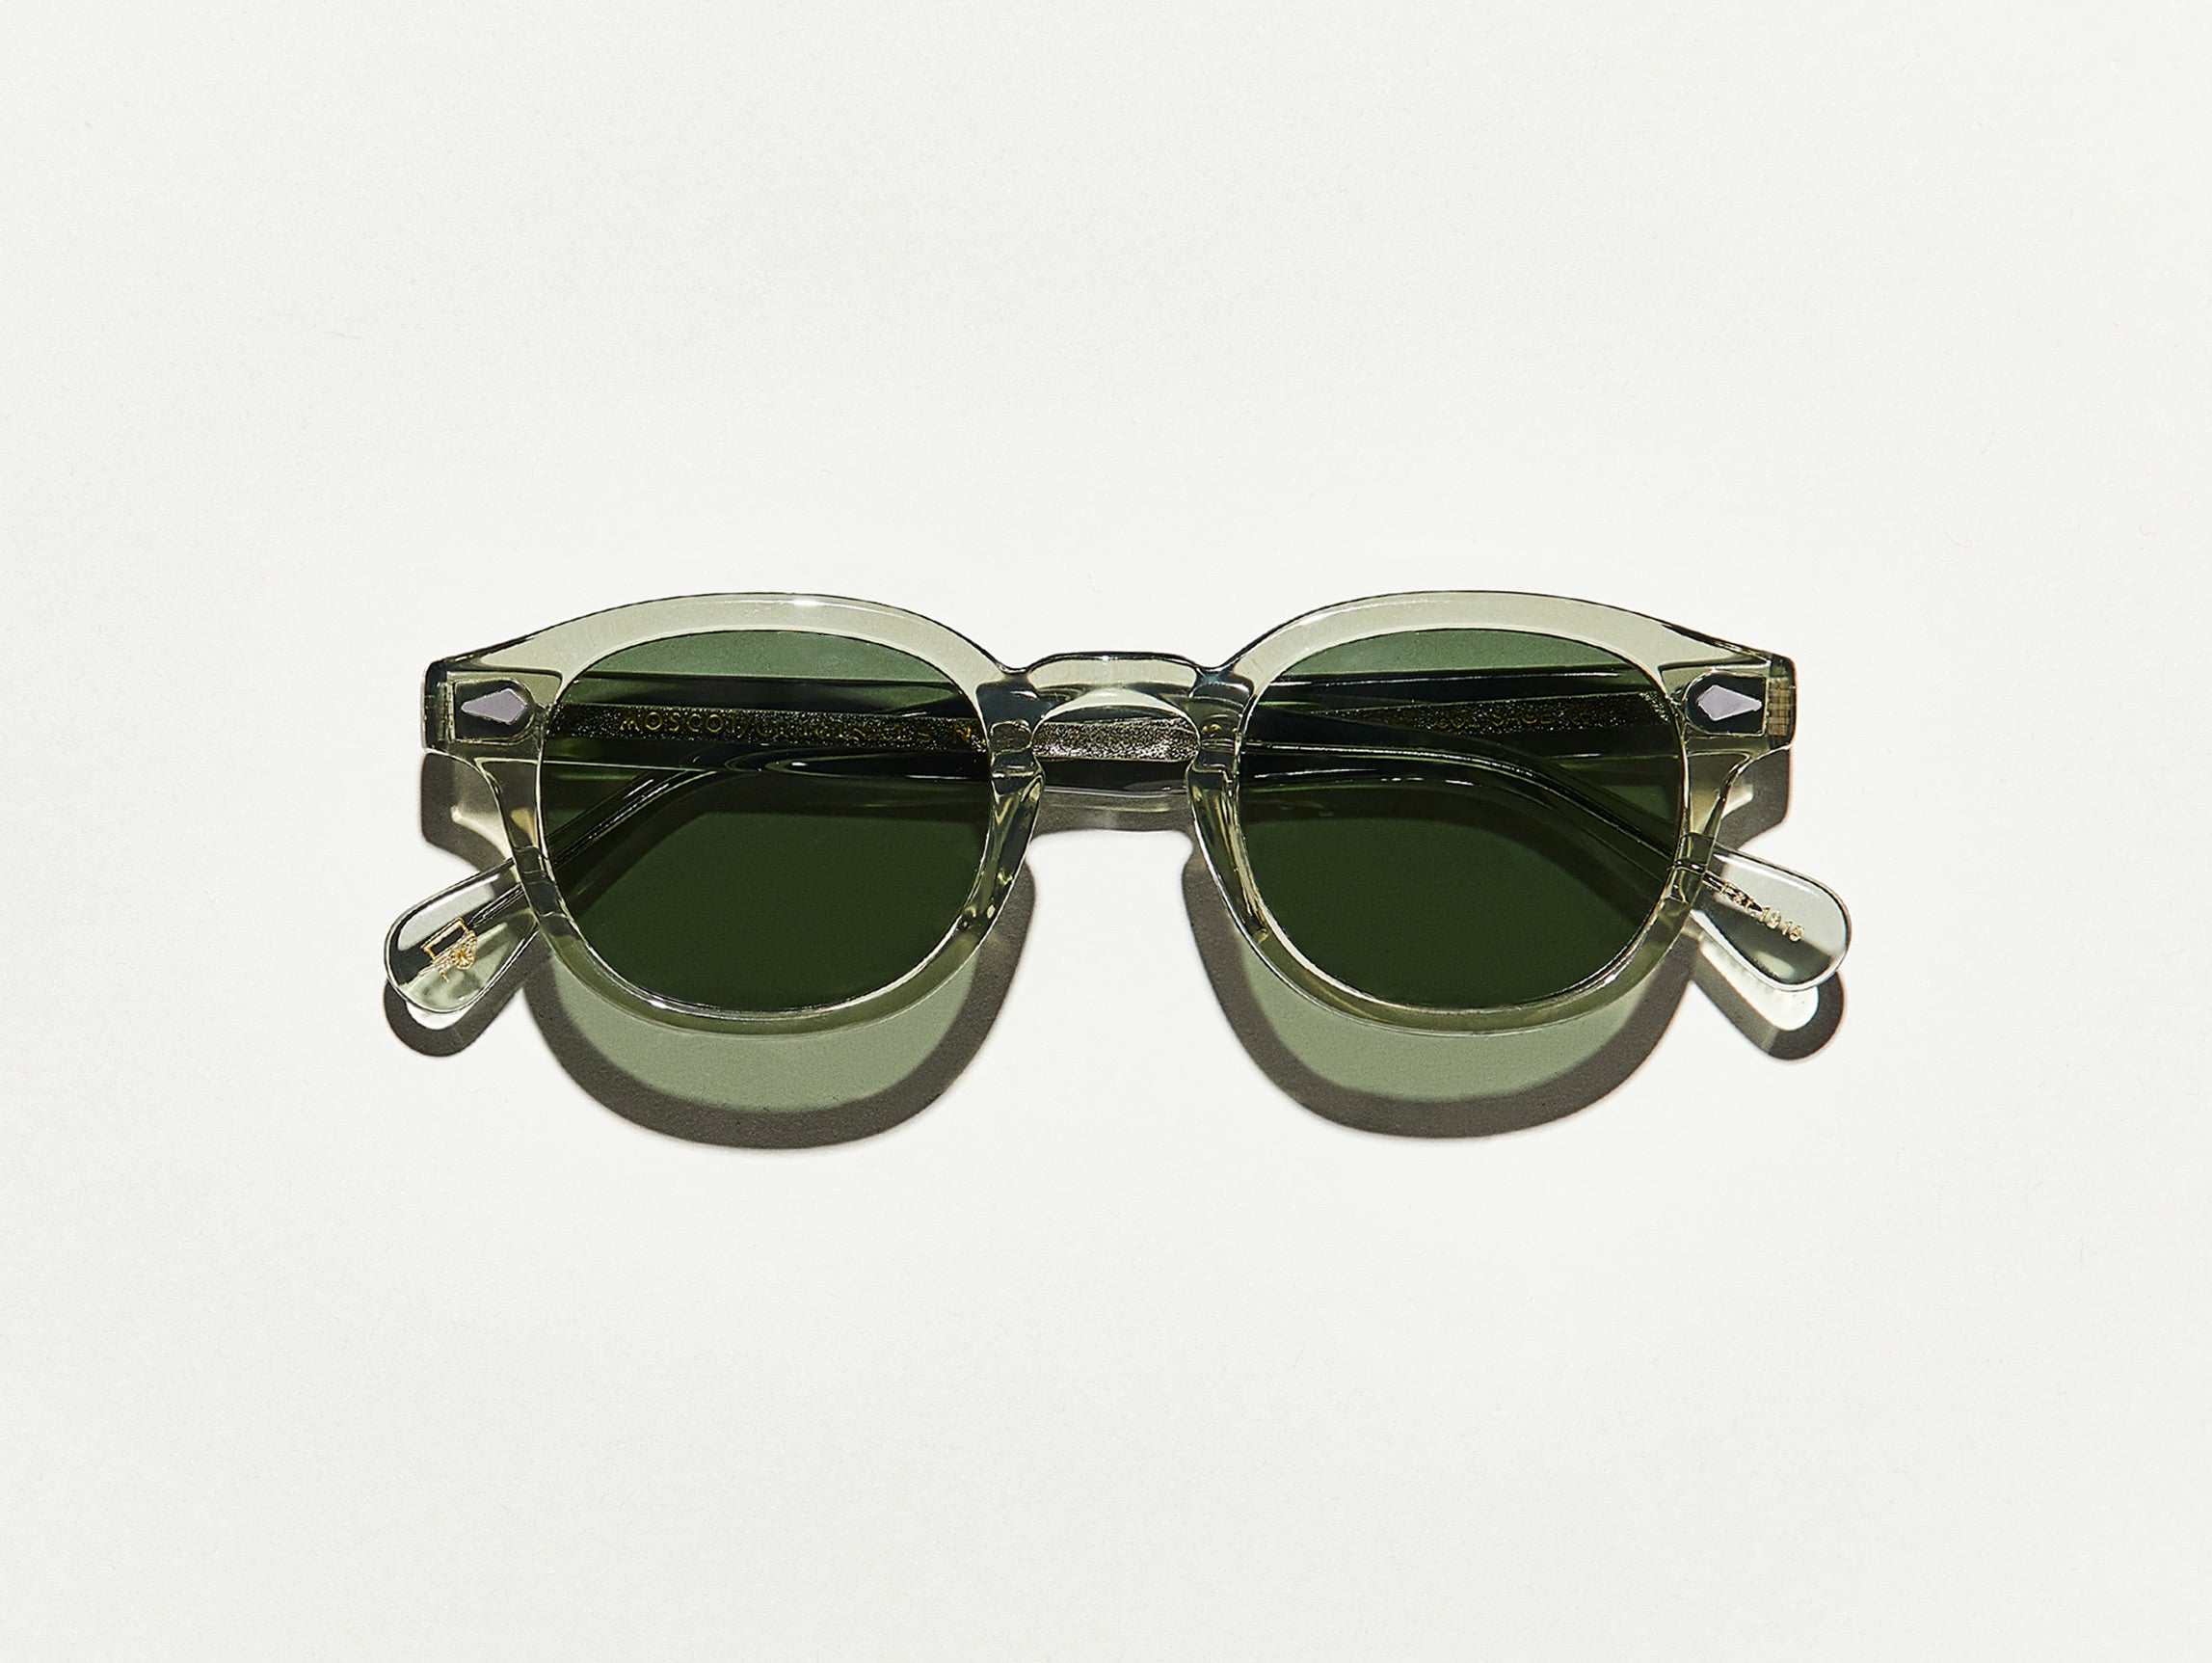 The LEMTOSH SUN in Sage with G-15 Glass Lenses